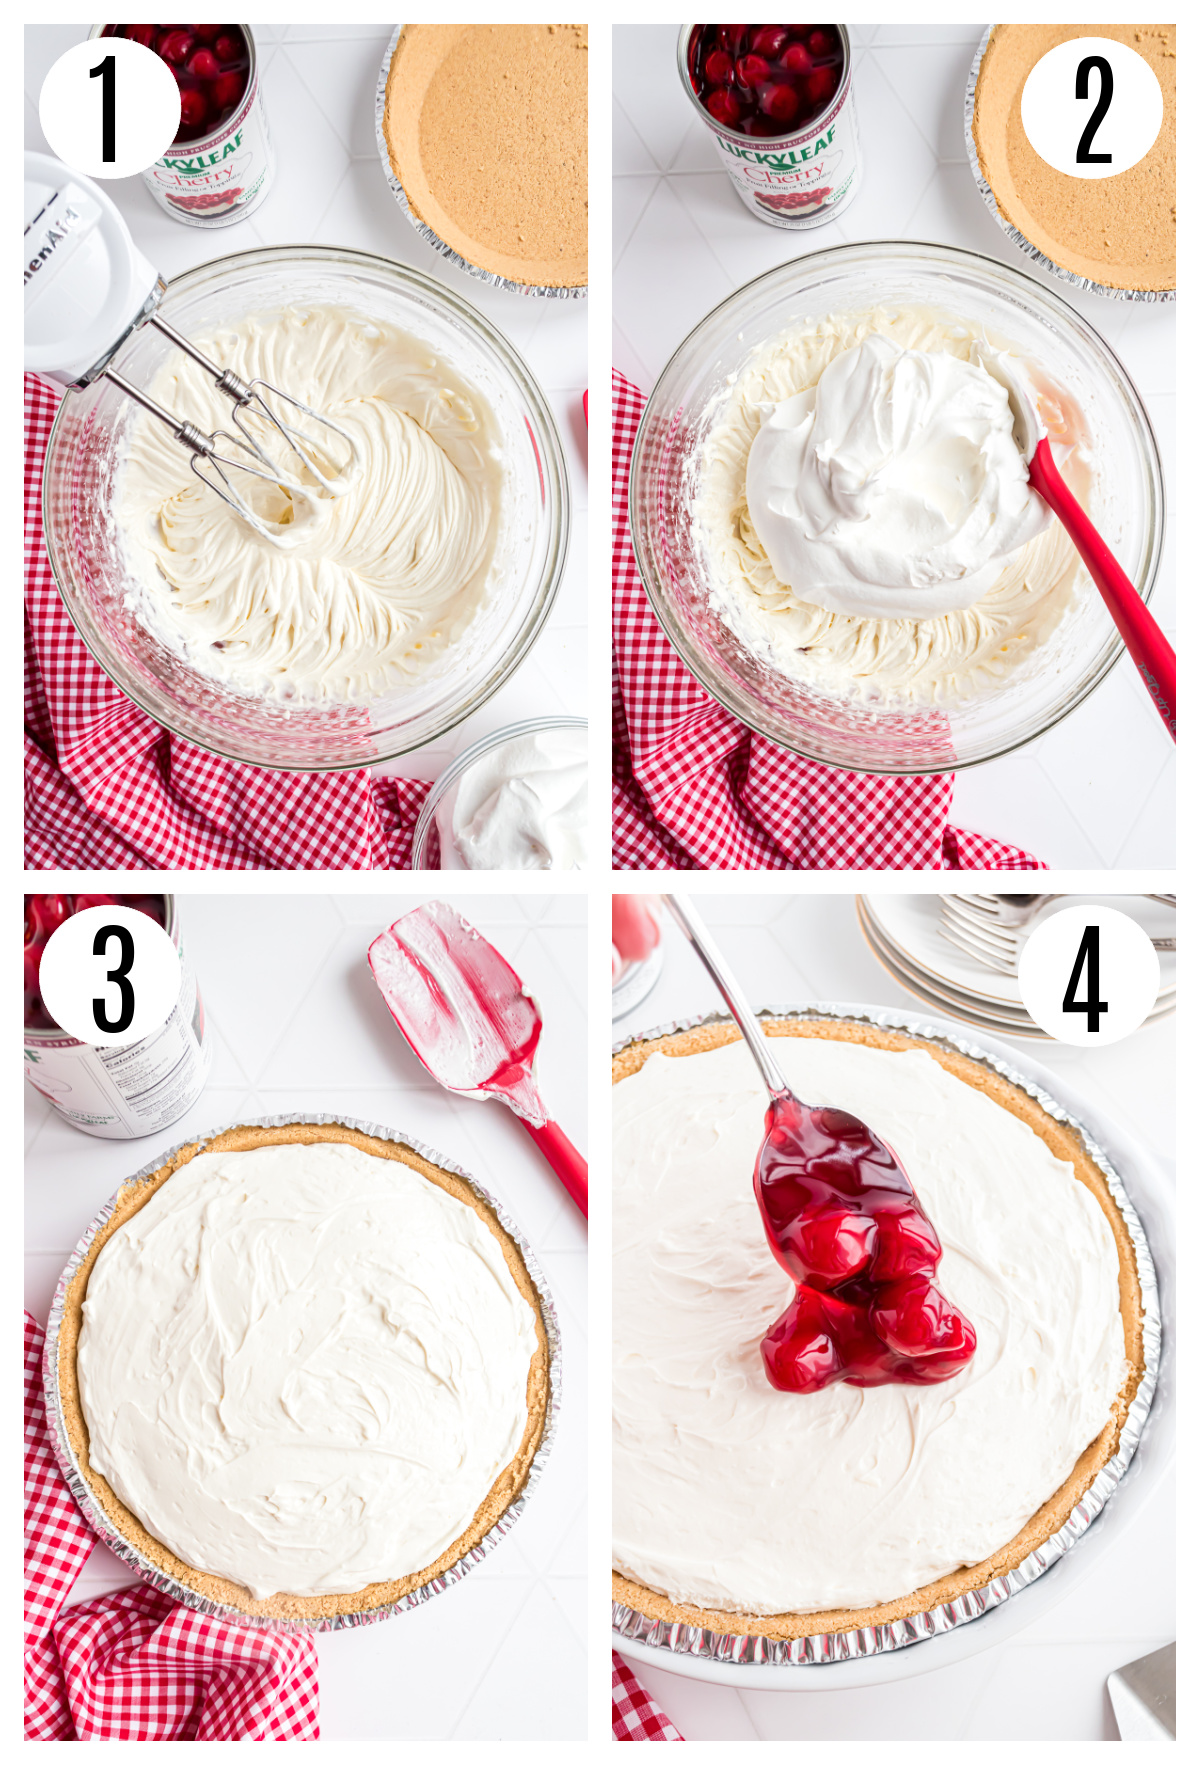 The steps to complete this recipe include: beating the cream cheese and sweetened condensed milk together with an electric mixer, folding in the cool whip, pouring the filling into the  crust and topping with the pie filling after the pie has been chilled.